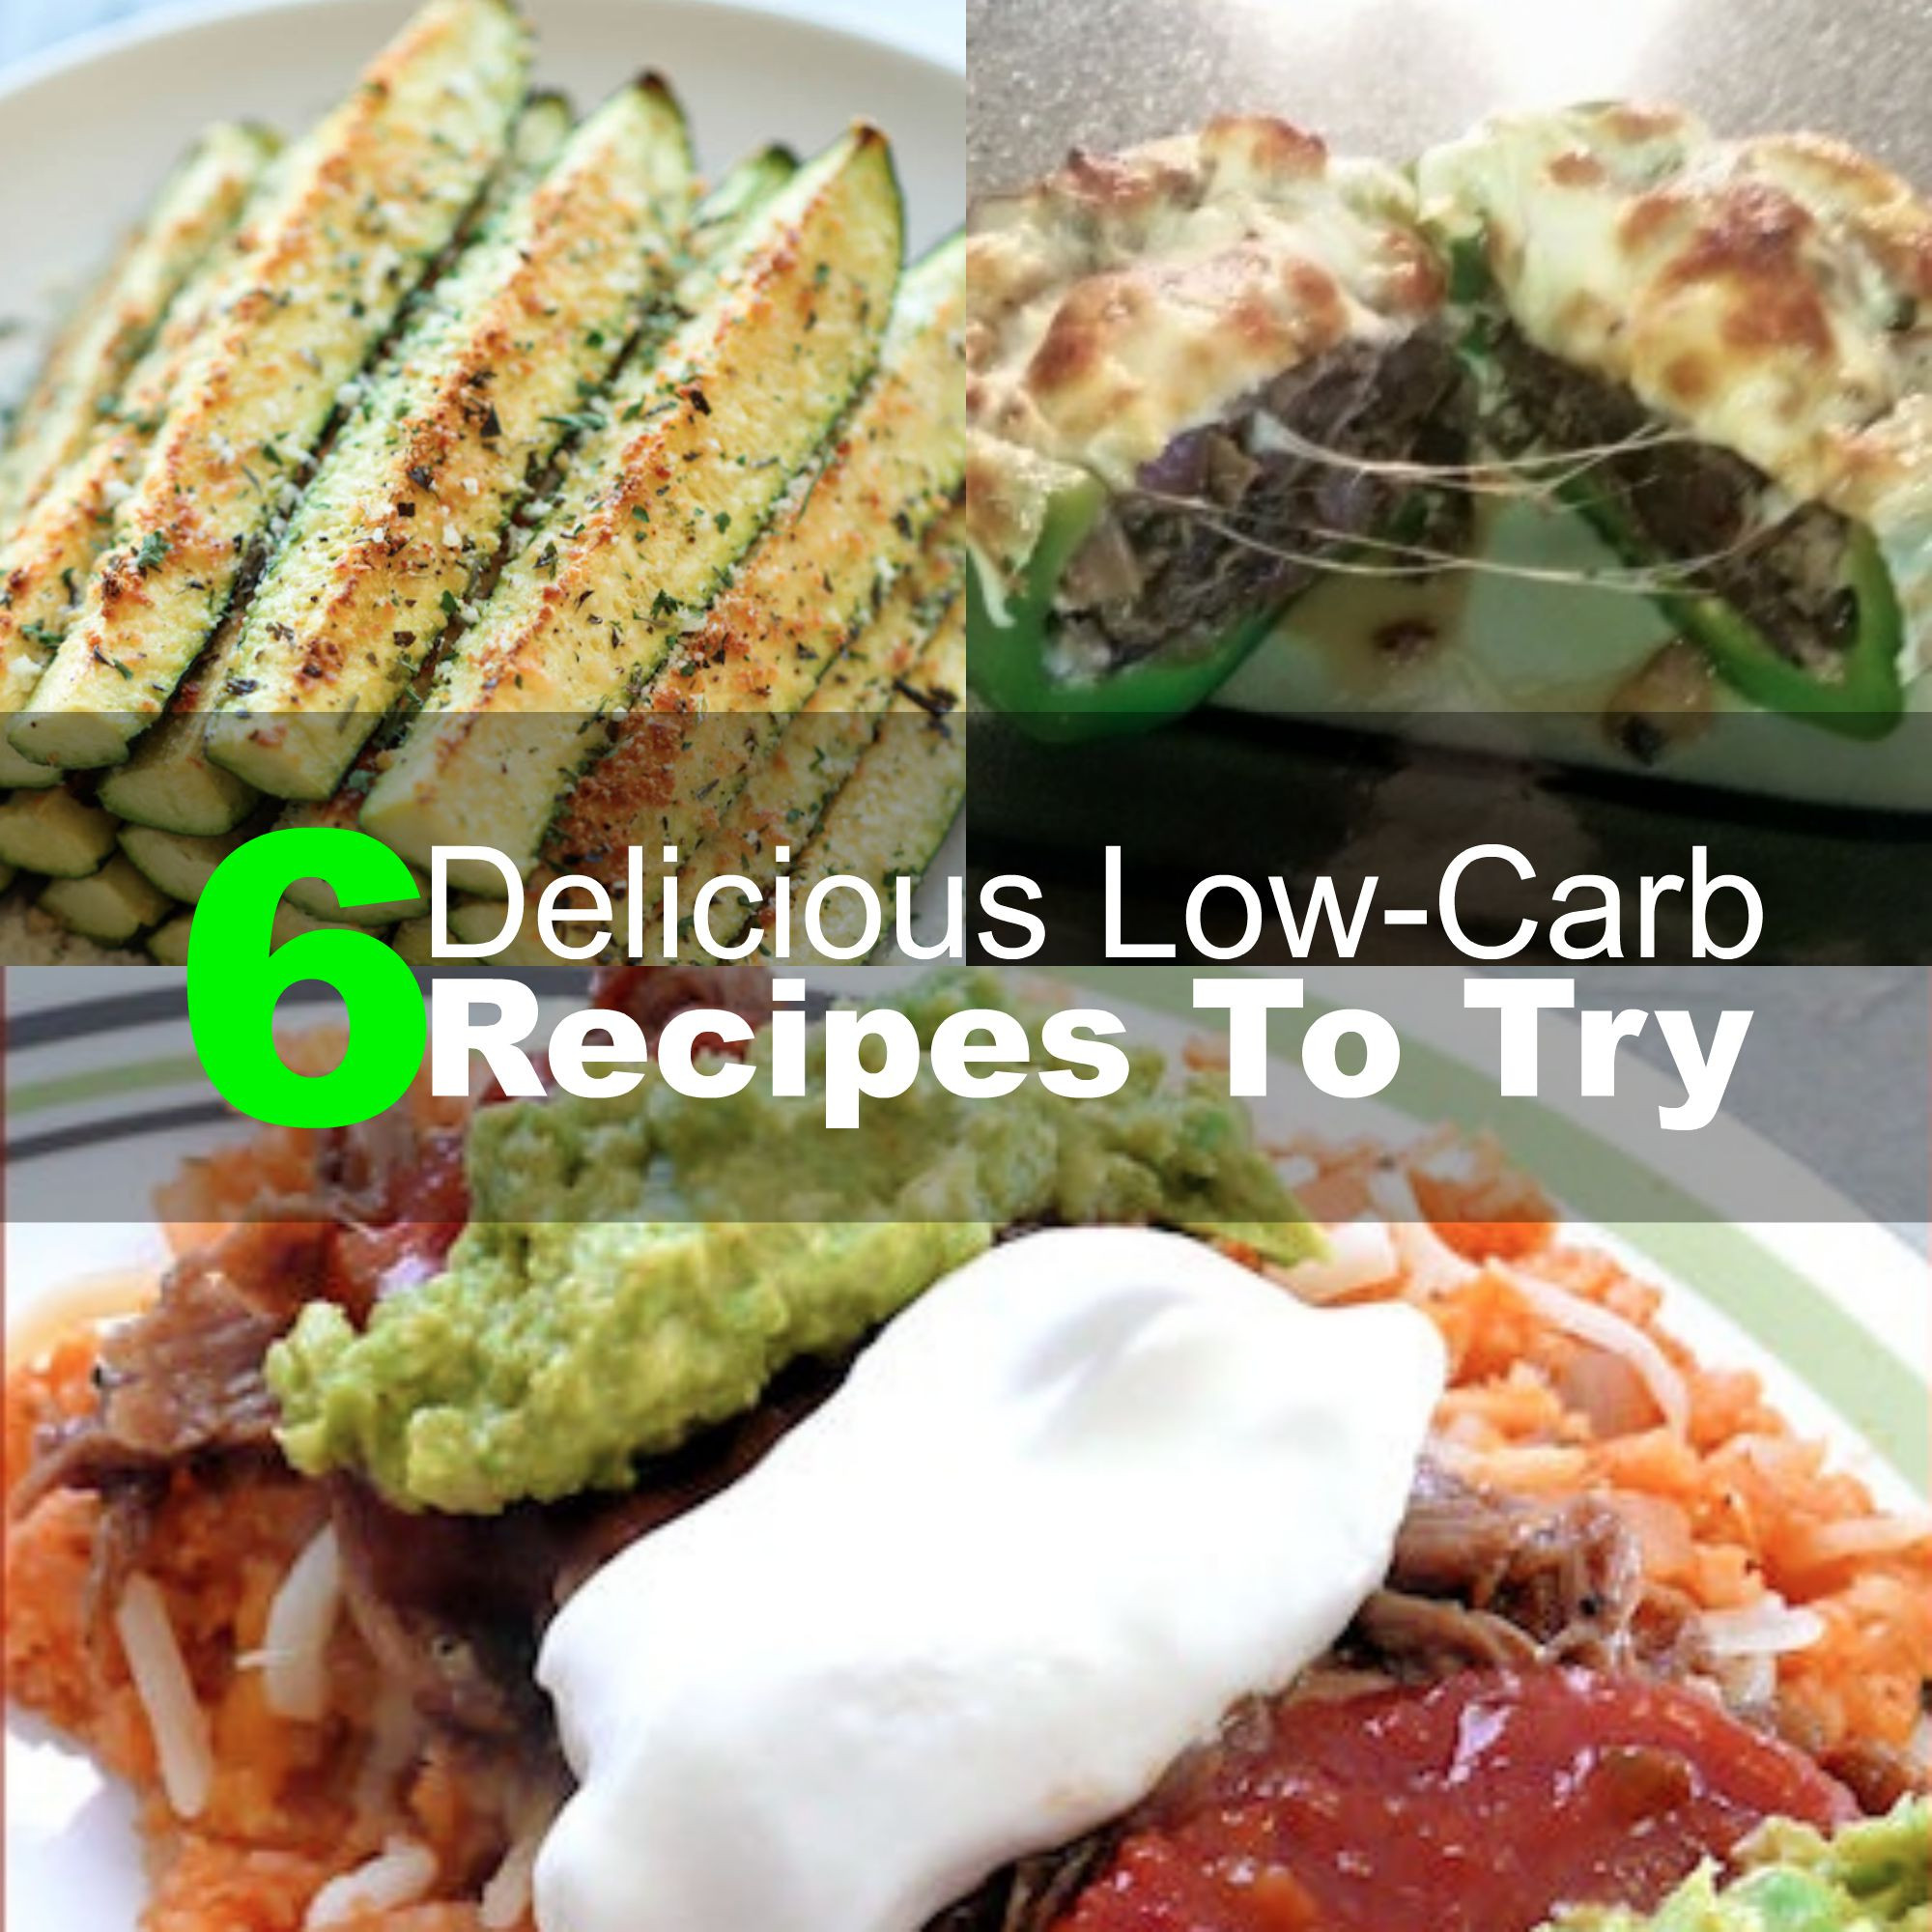 Recipes For Low Carb
 6 Delicious Low Carb Recipes To Try 2016